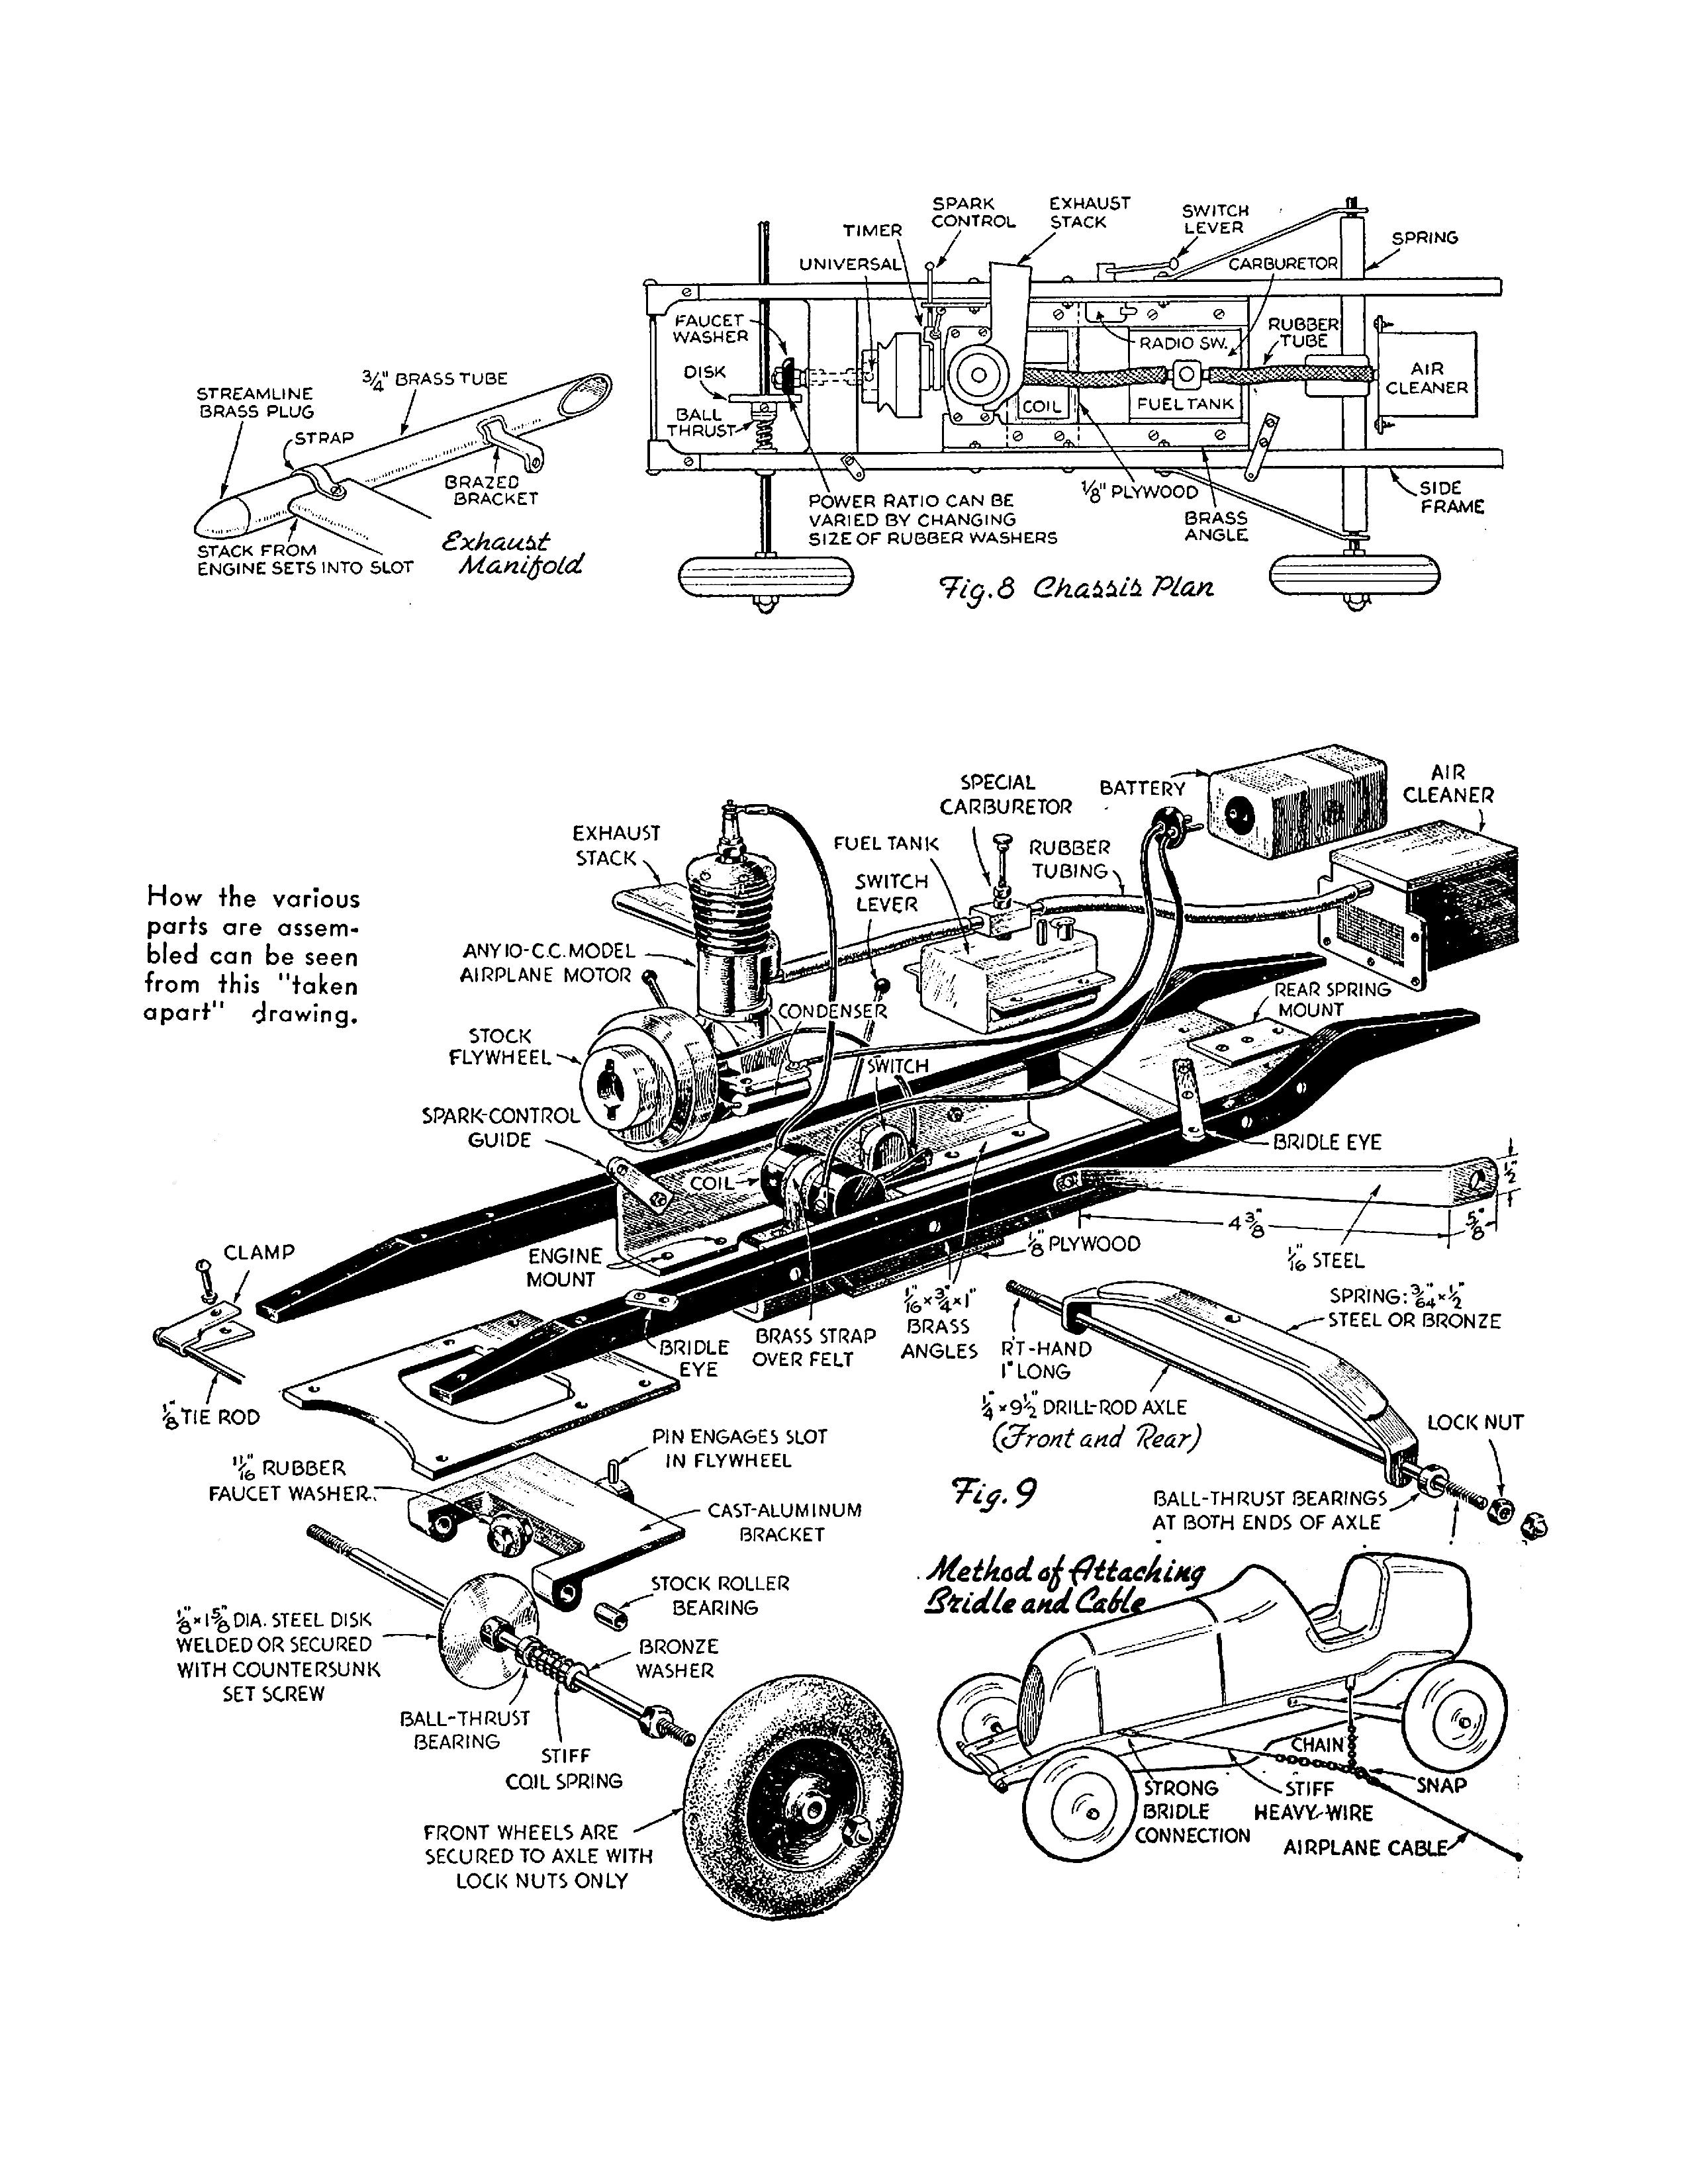 printed plan and article teather vintage midget racer length 20 ¾” width 9 ¾” power ¼ hp gas suitable for radio control